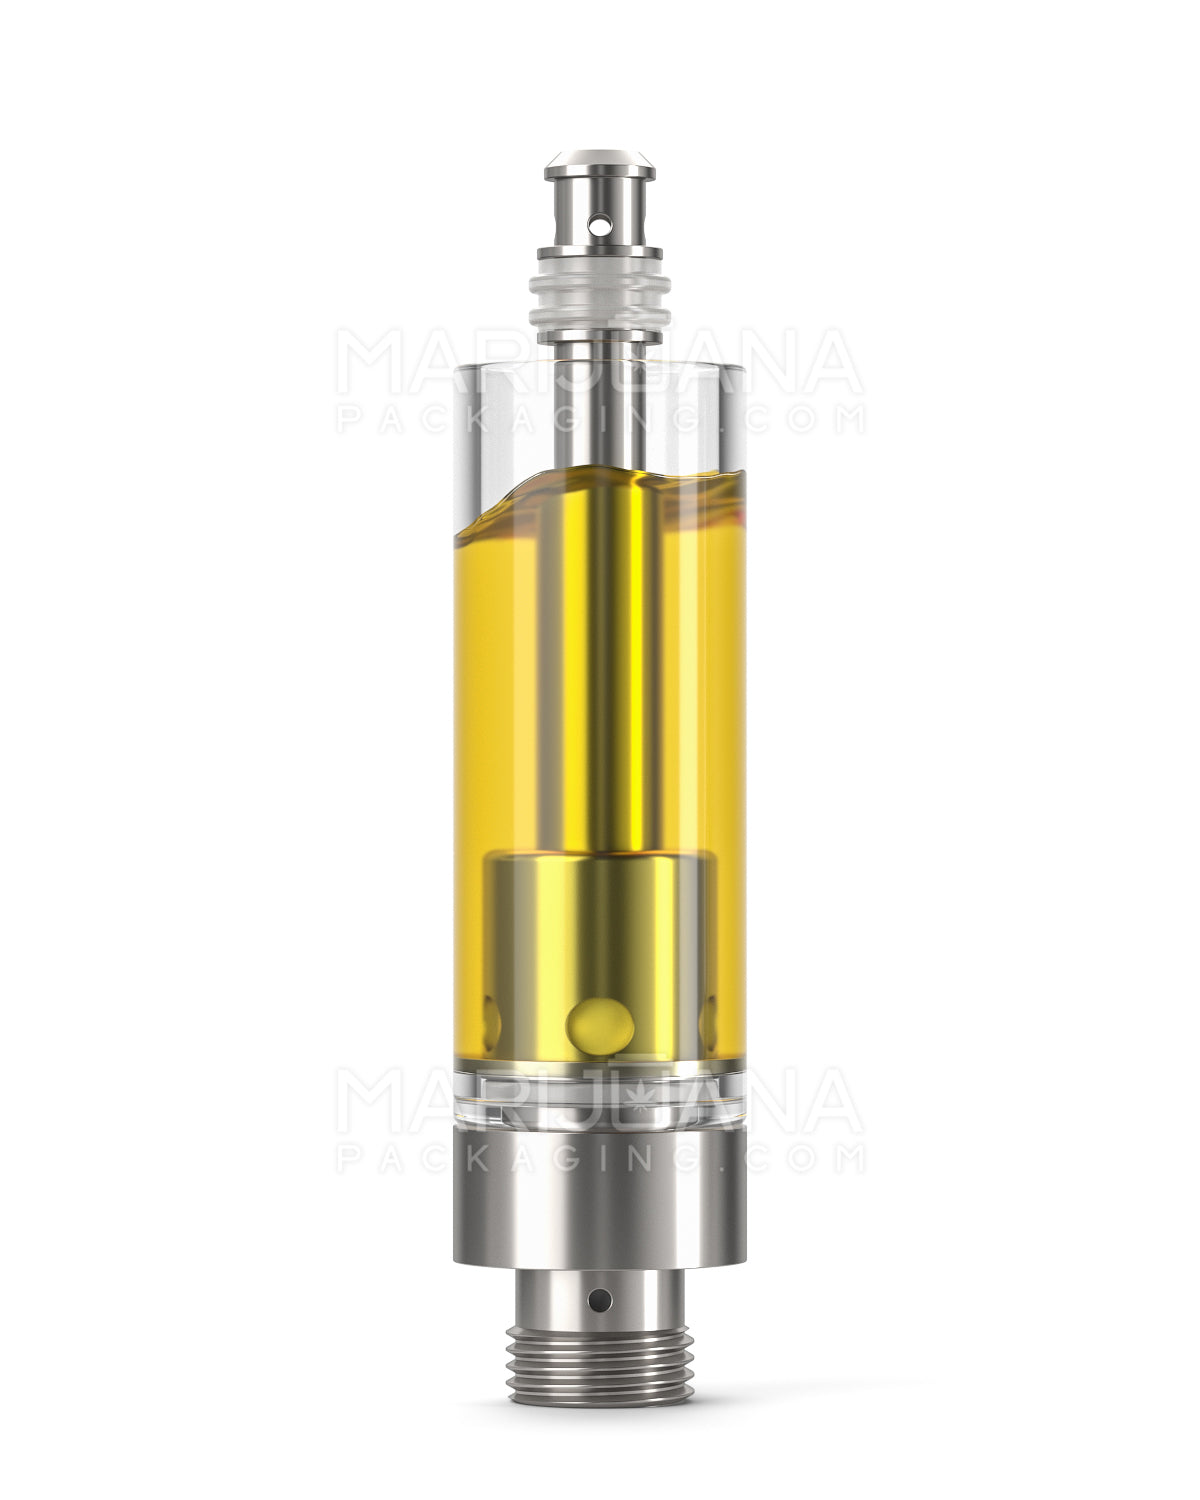 AVD | Glass Vape Cartridge with 2mm Aperture | 1mL - Eazy Press - 1200 Count - 2